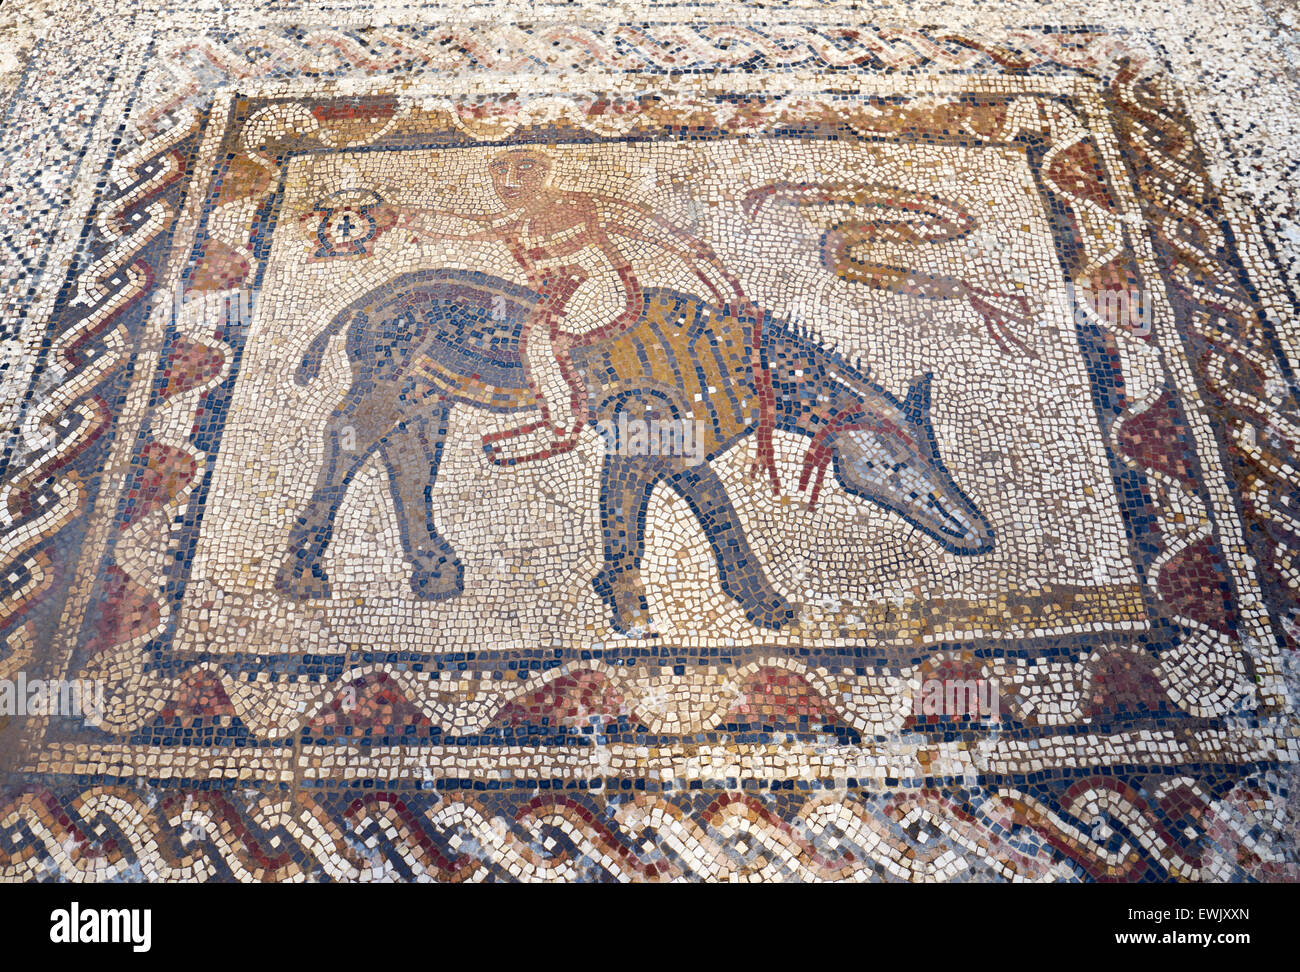 Roman mosaic in the House of the Athlete or Desultor,  Volubilis, Meknes region, UNESCO, Morocco, Africa Stock Photo